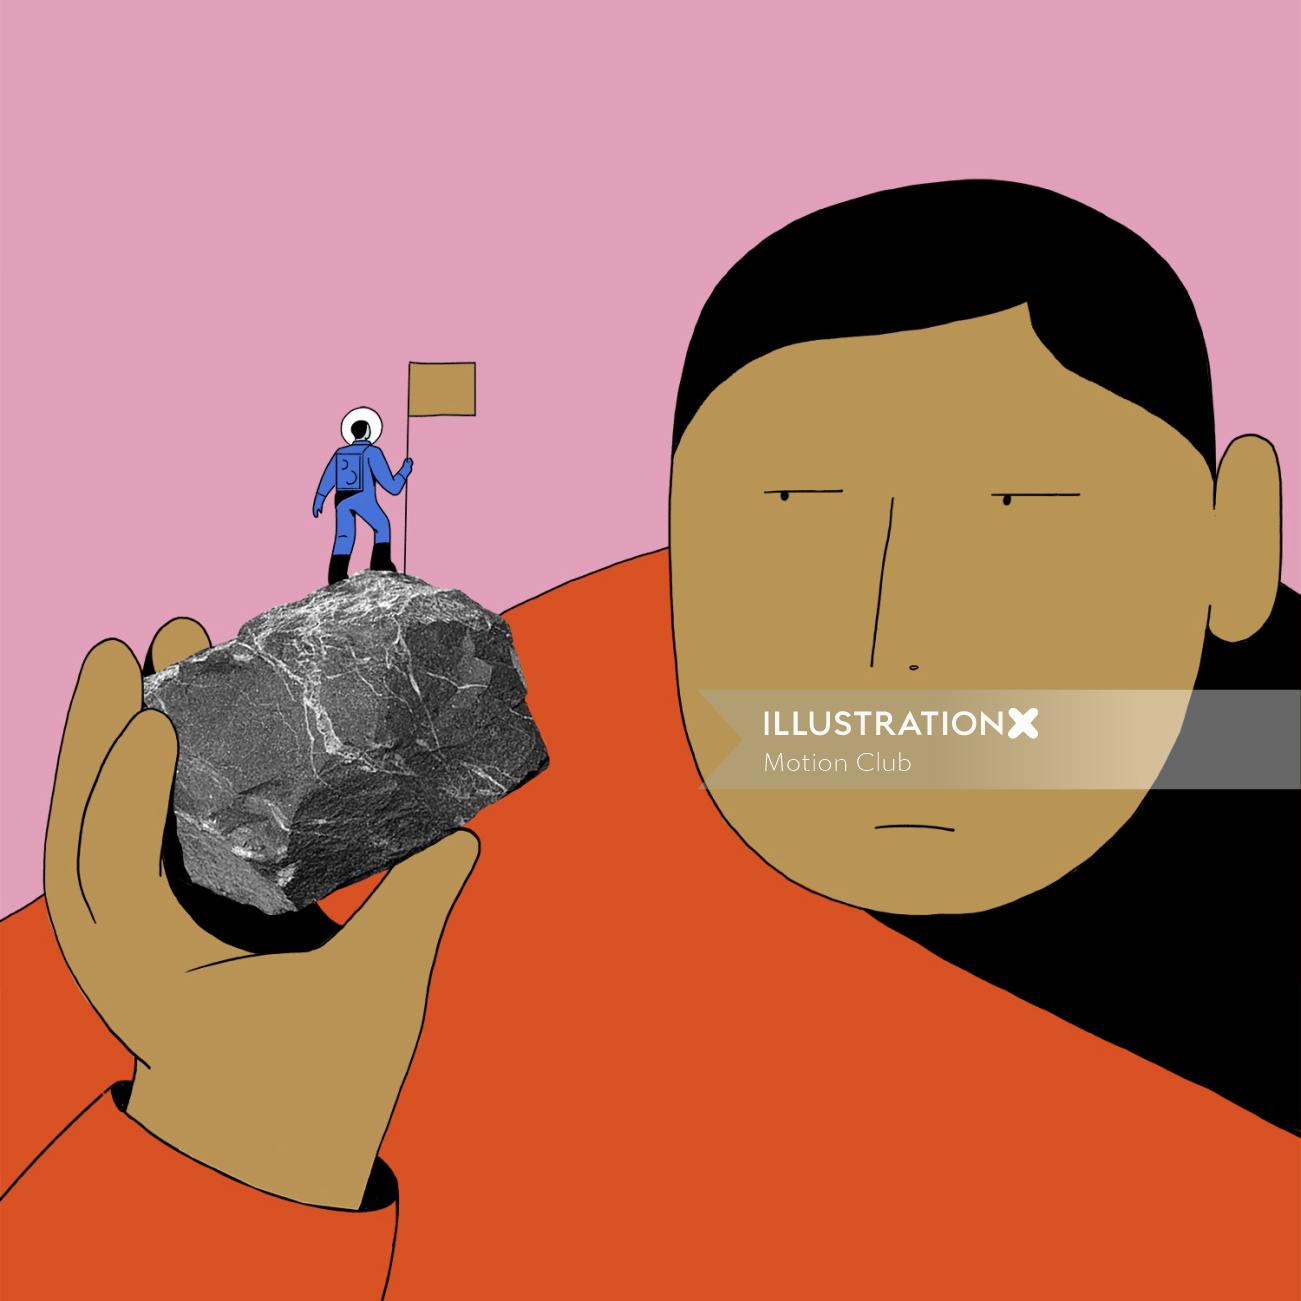 2D illustration of man and stone